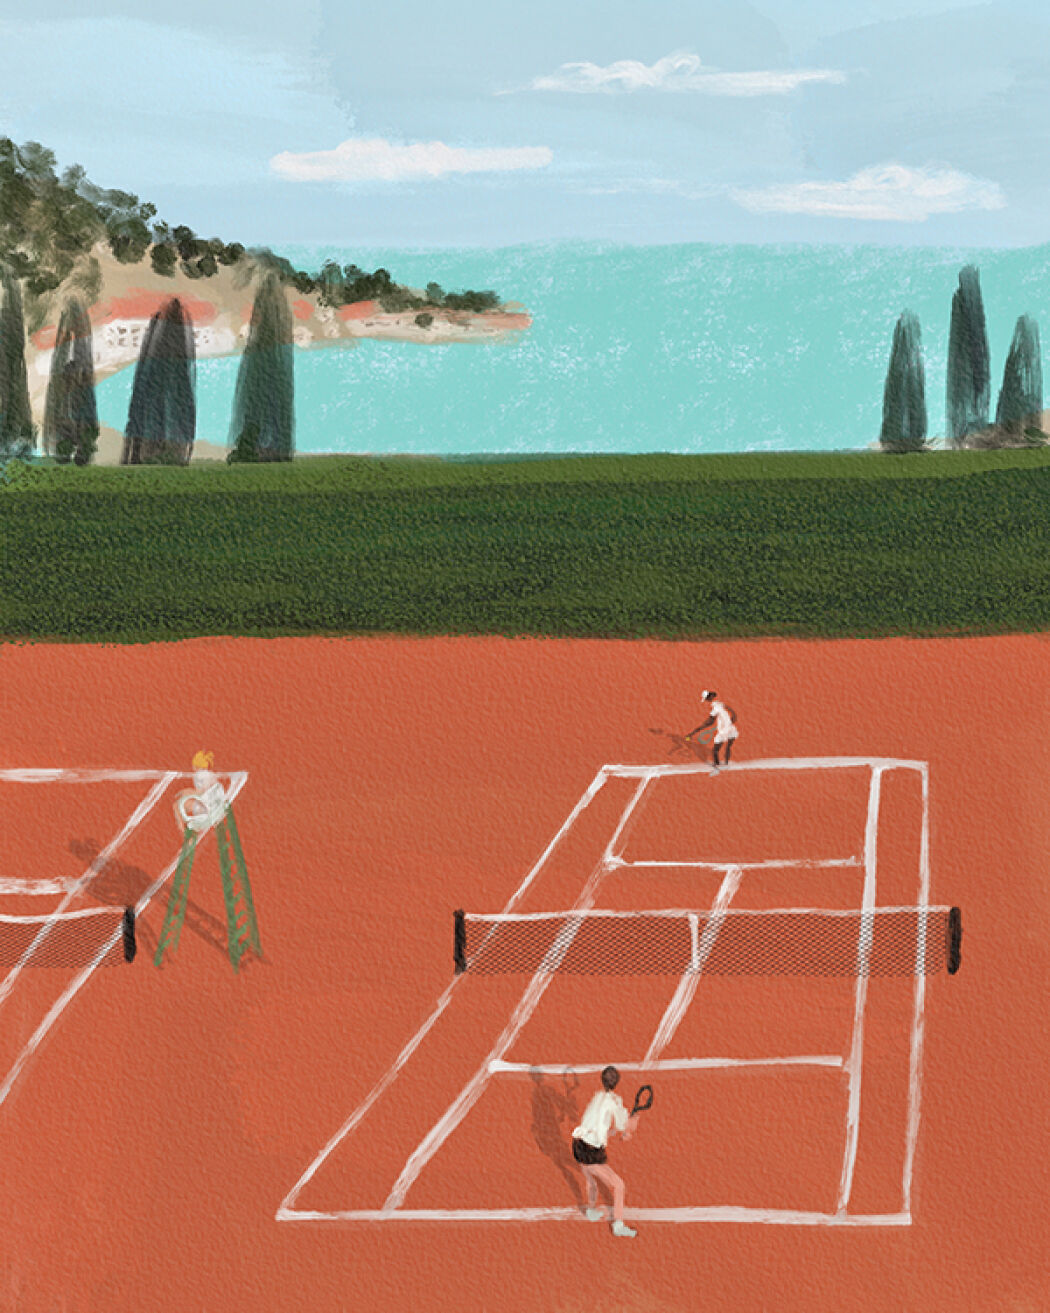 Tennis illustration, painterly and graphic drawing style, by Christina Gliha